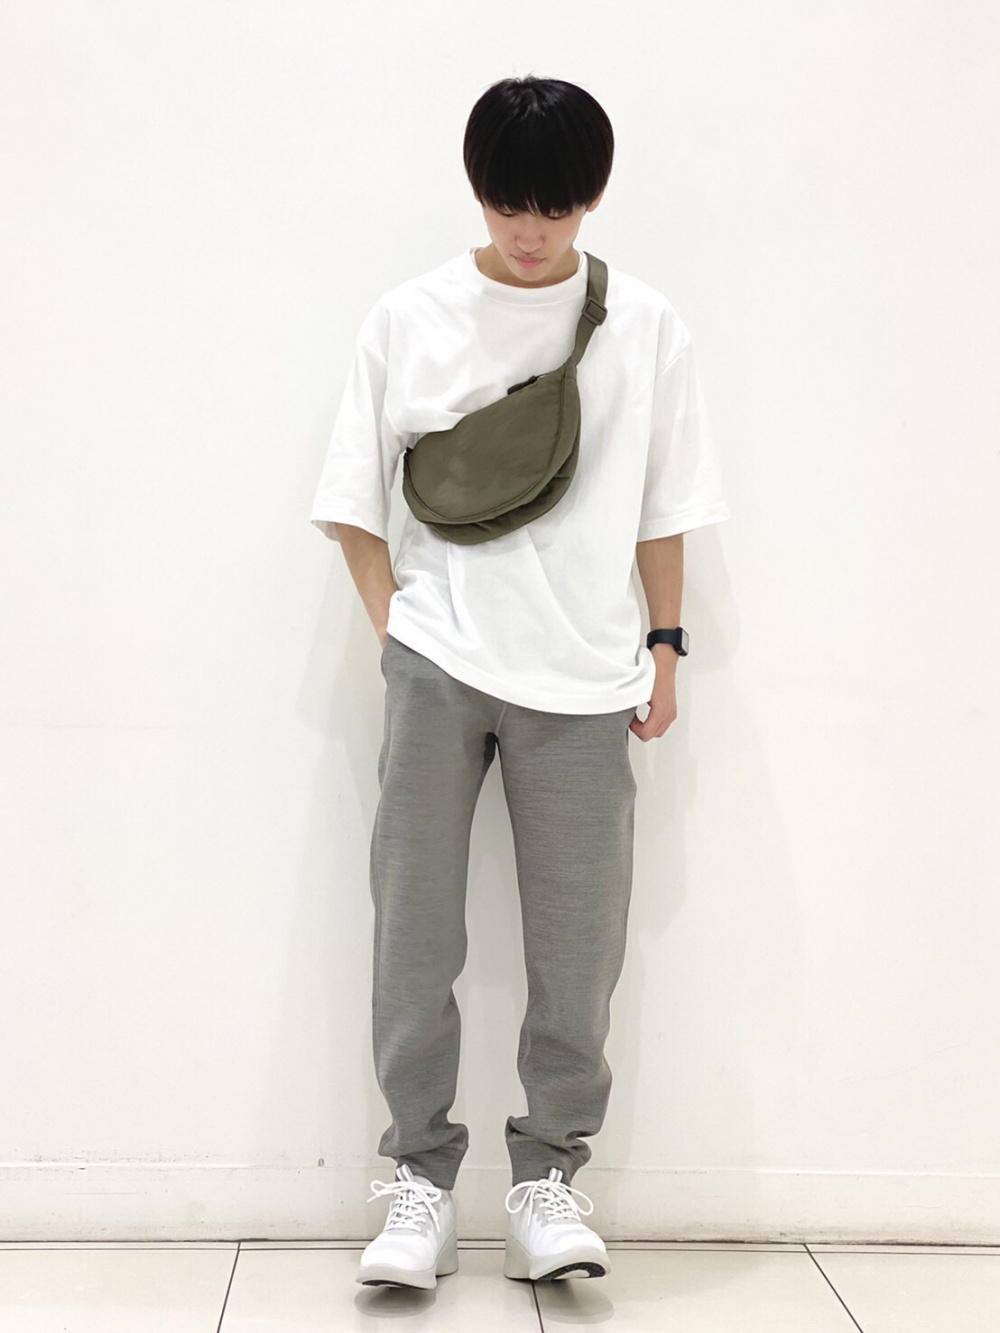 Check styling ideas for「Round Mini Shoulder Bag」